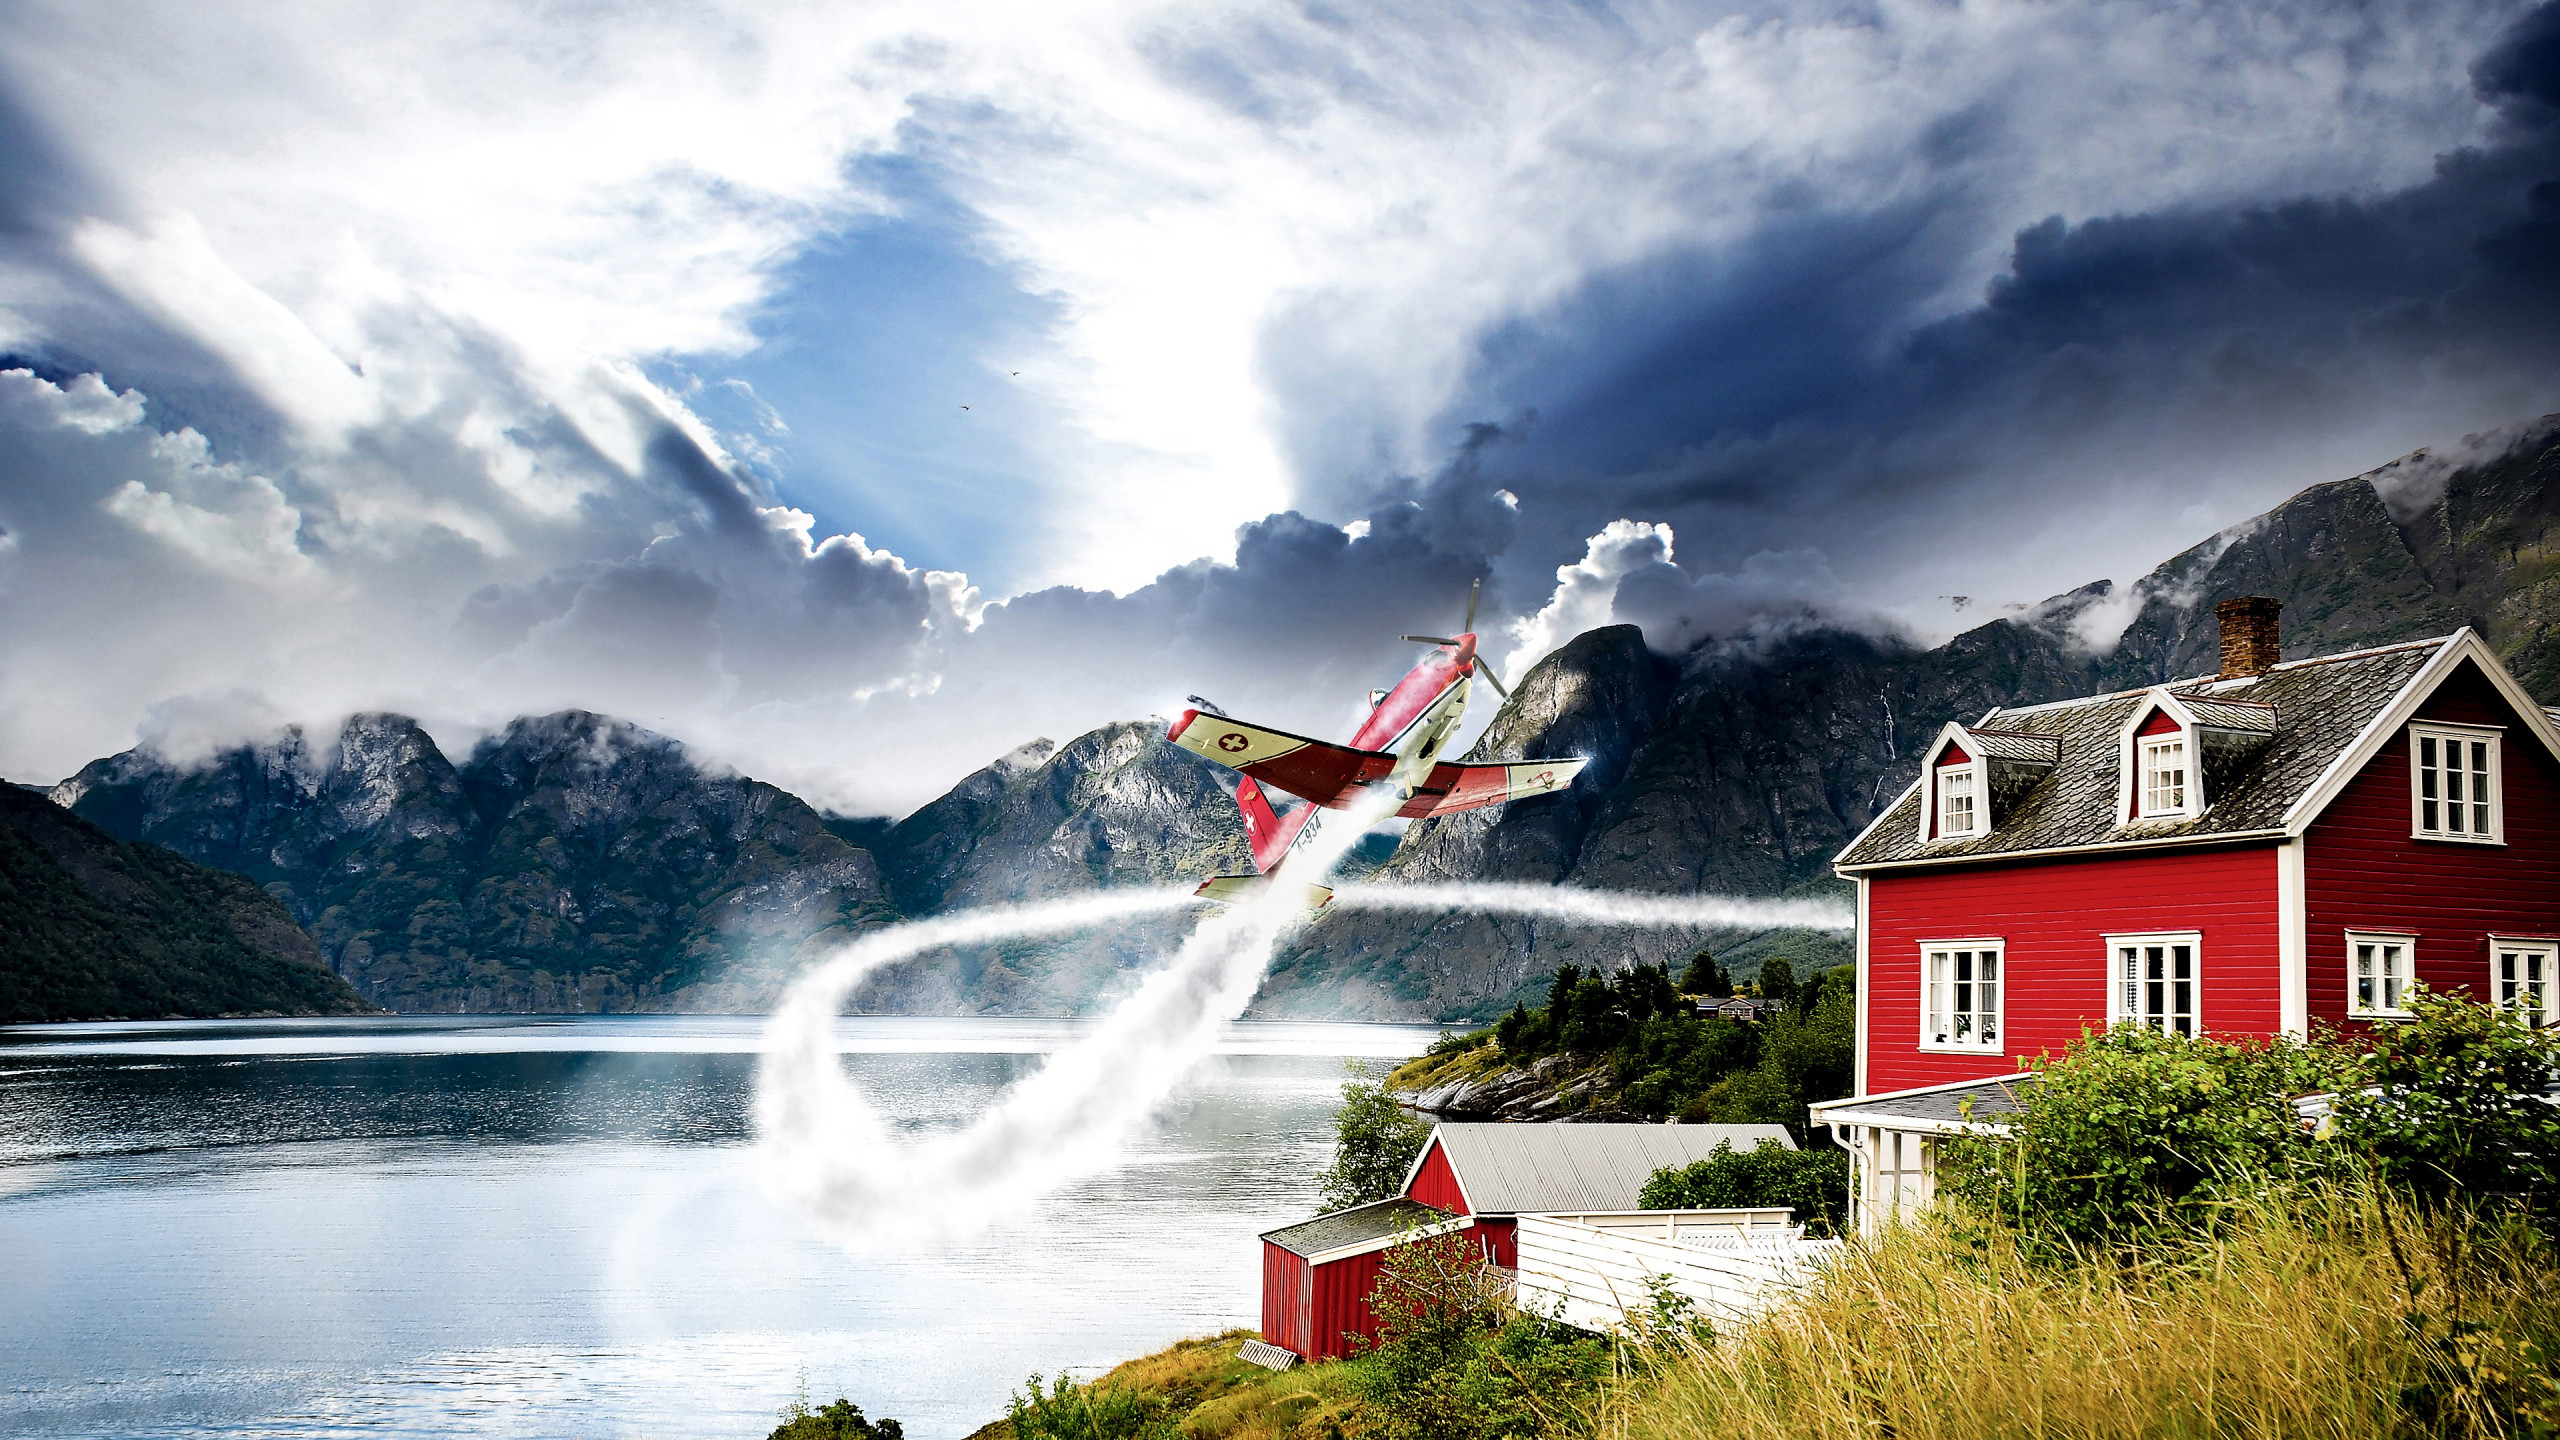 Norway vastness and one airplane wallpaper 2560x1440